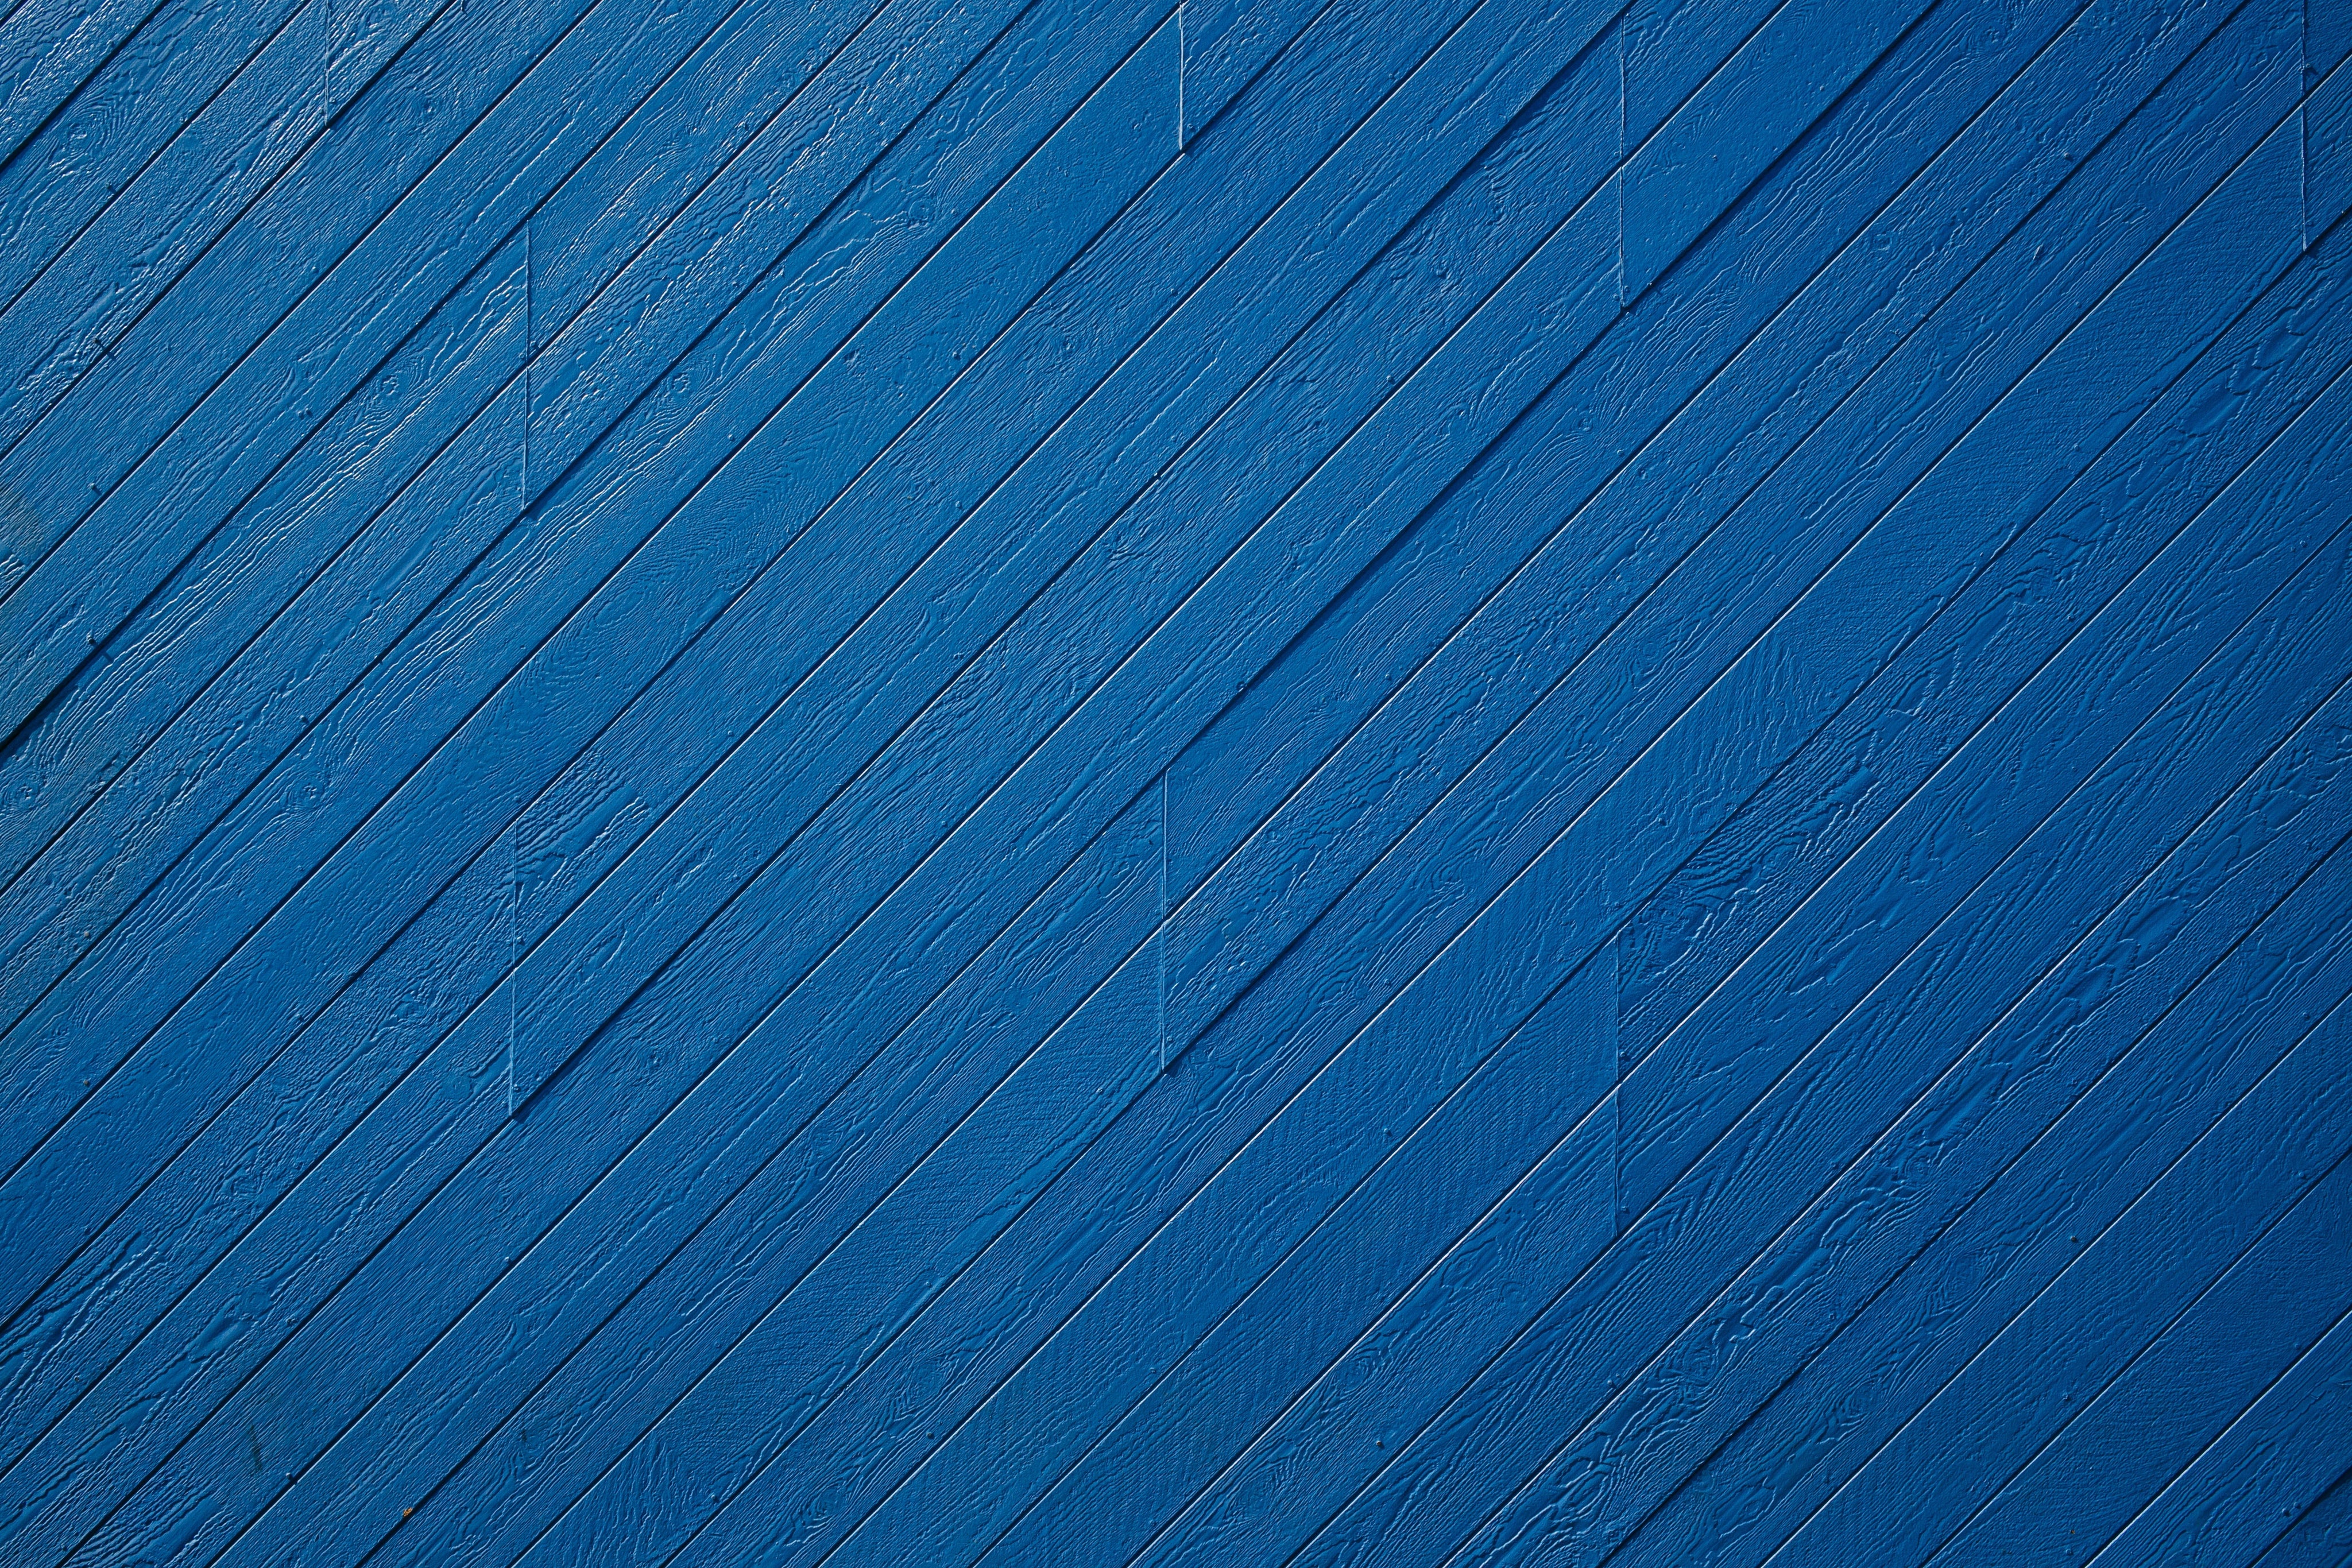 Texture of wood cladding painted blue